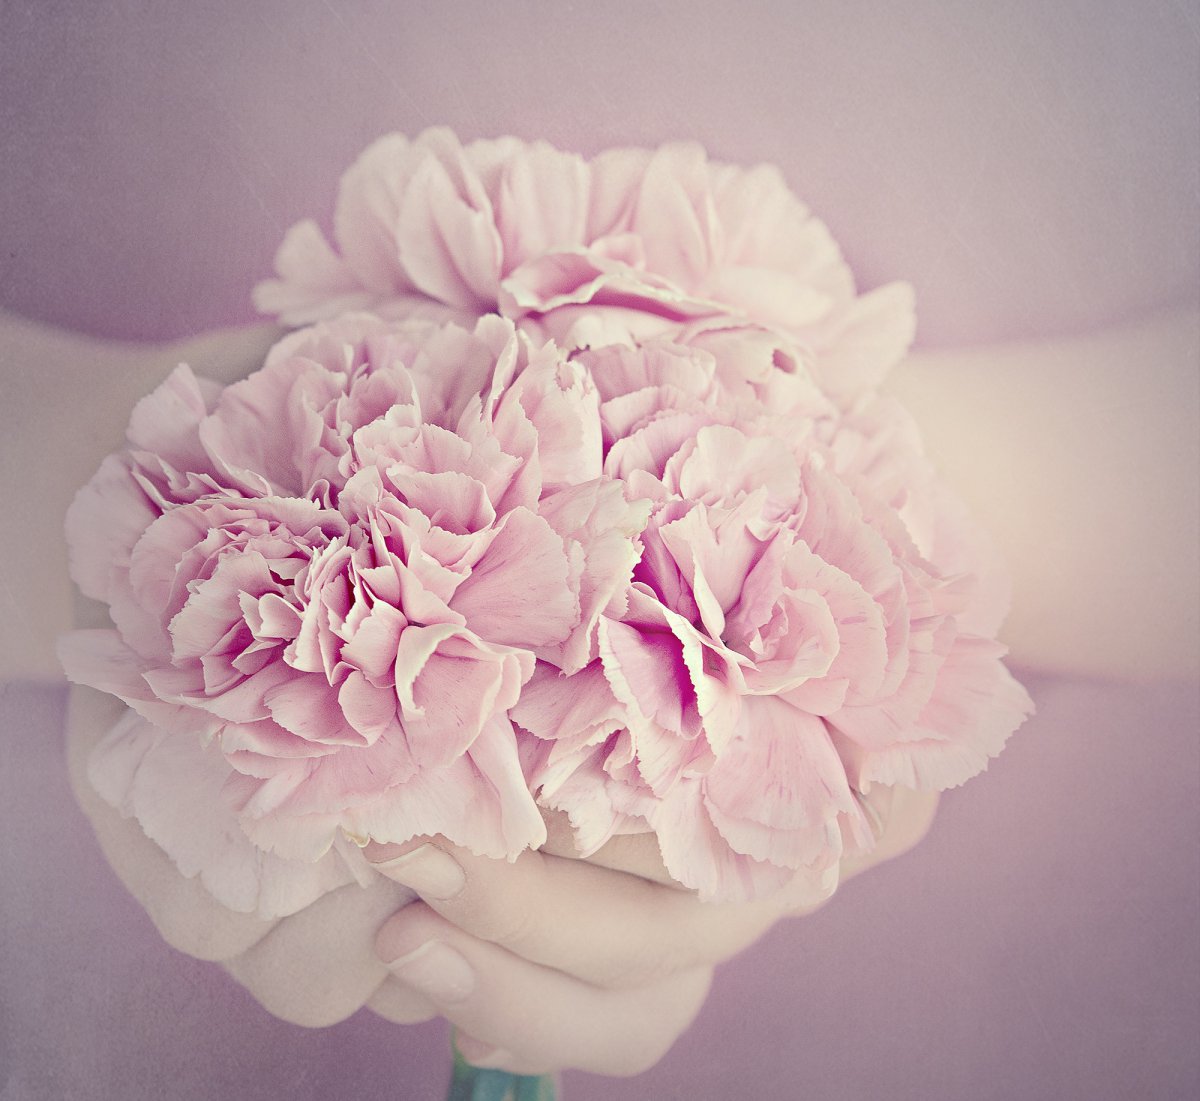 Warm and elegant carnation pictures